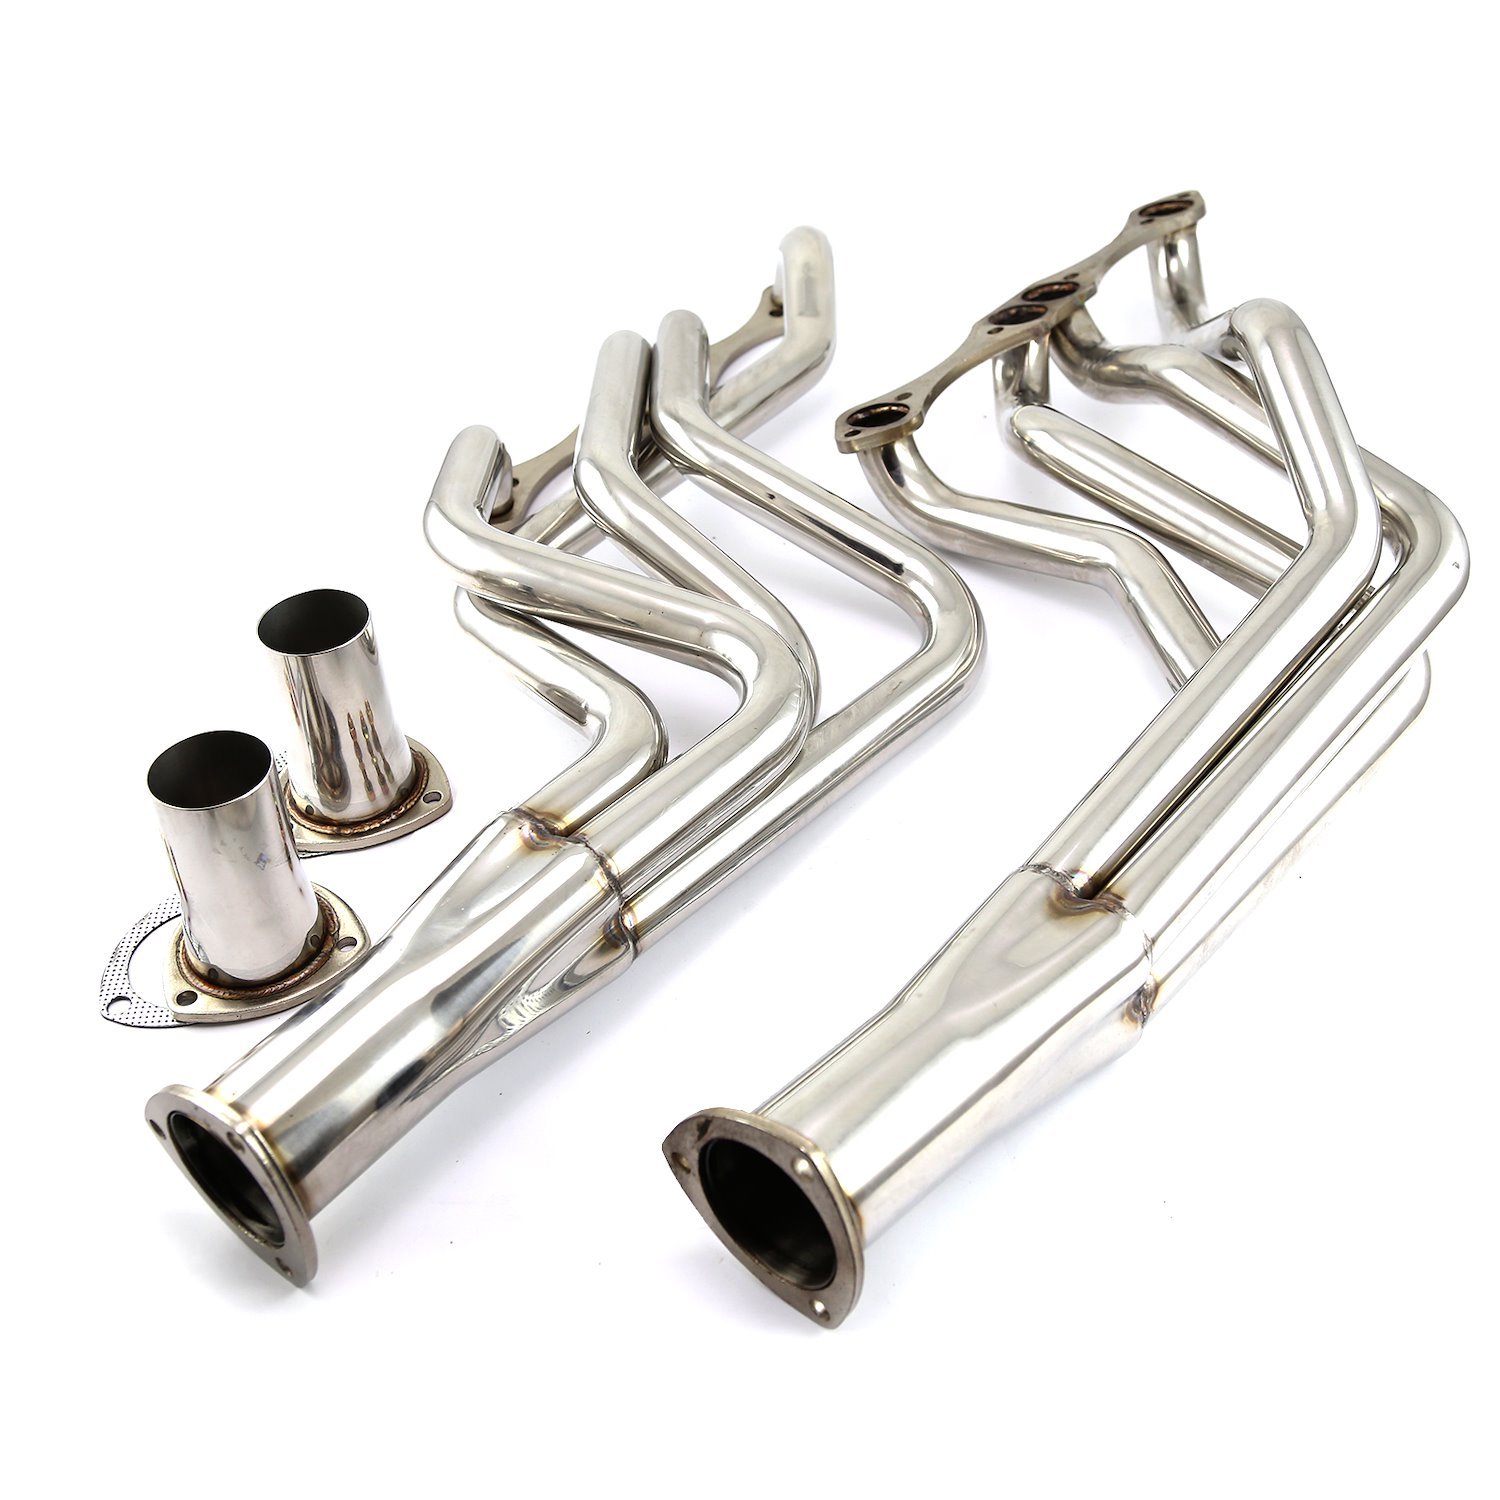 Chevy SBC 350 1965-89 Chassis 1 5/8 to 2 Stainless Steel Exhaust Headers